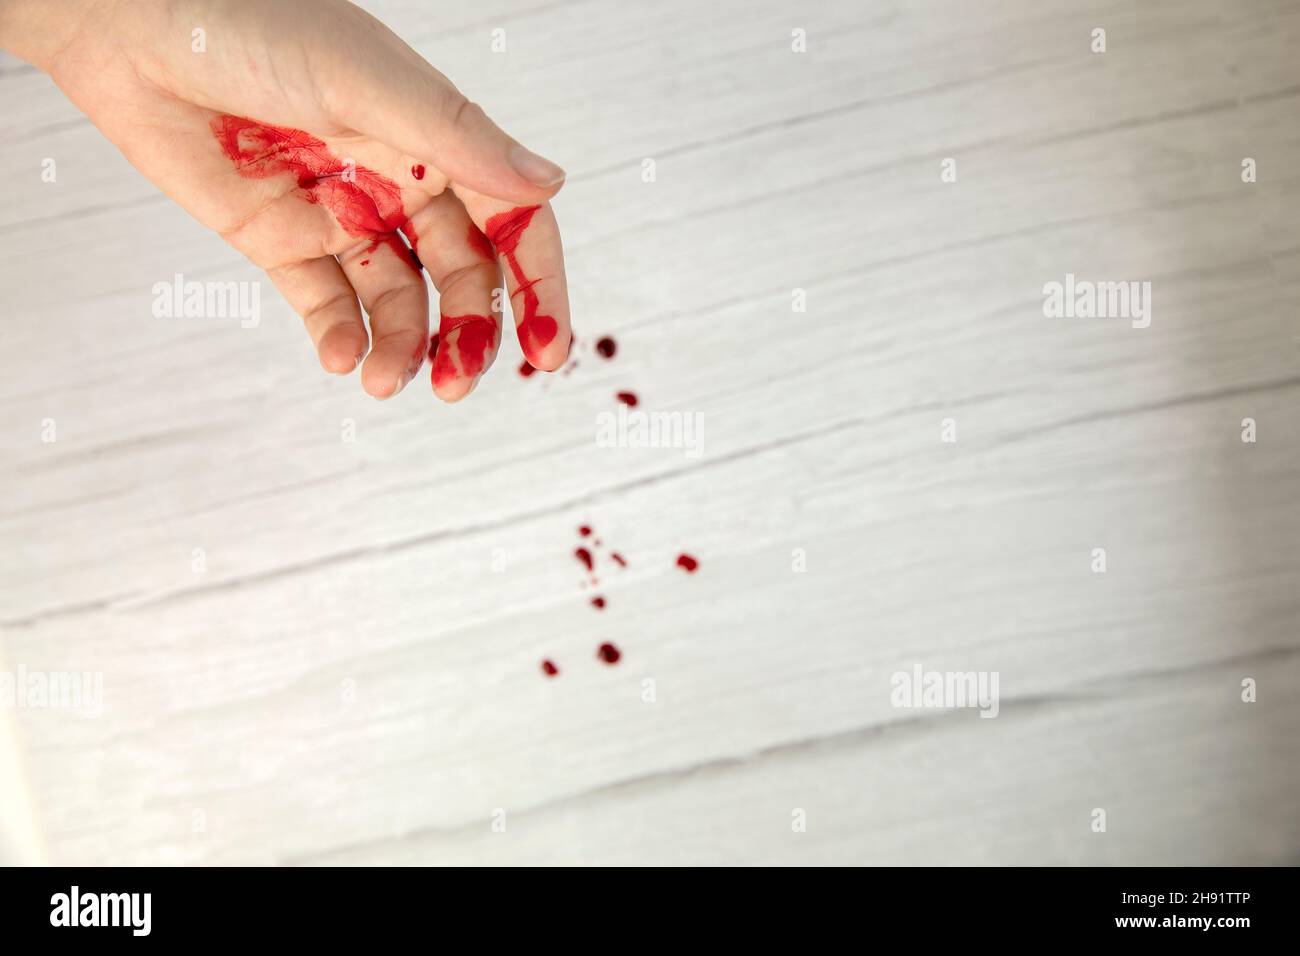 hand injury with blood, blood wound cut top view, copy space, medical concept needs stitches Stock Photo